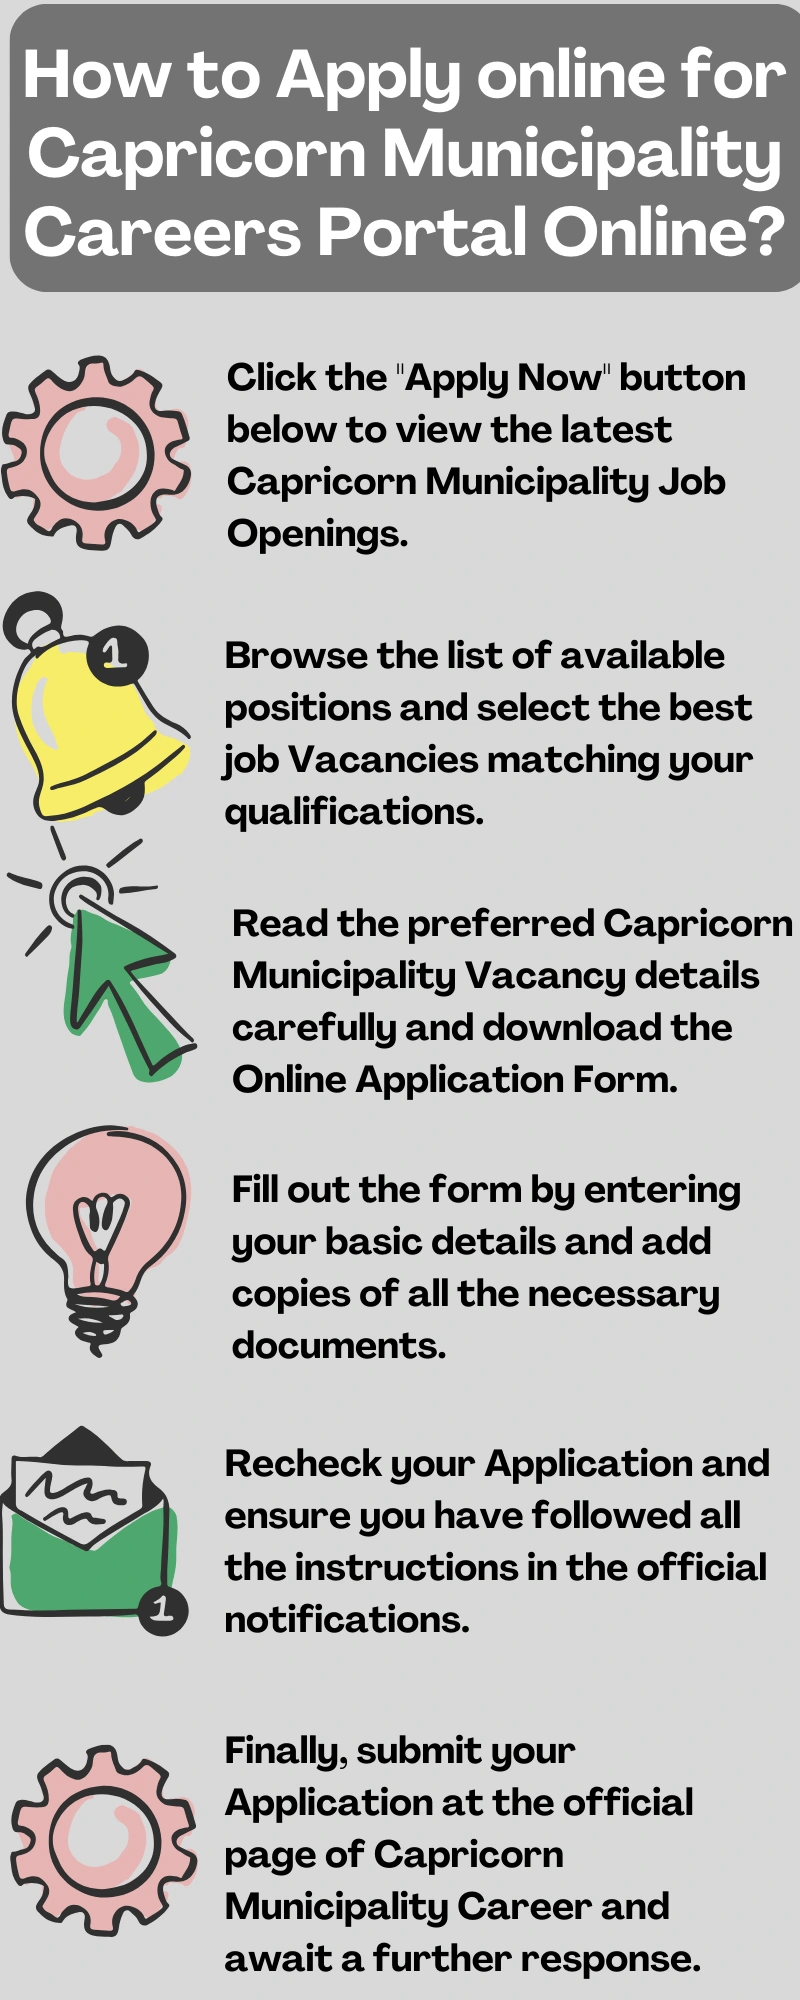 How to Apply online for Capricorn Municipality Careers Portal Online?